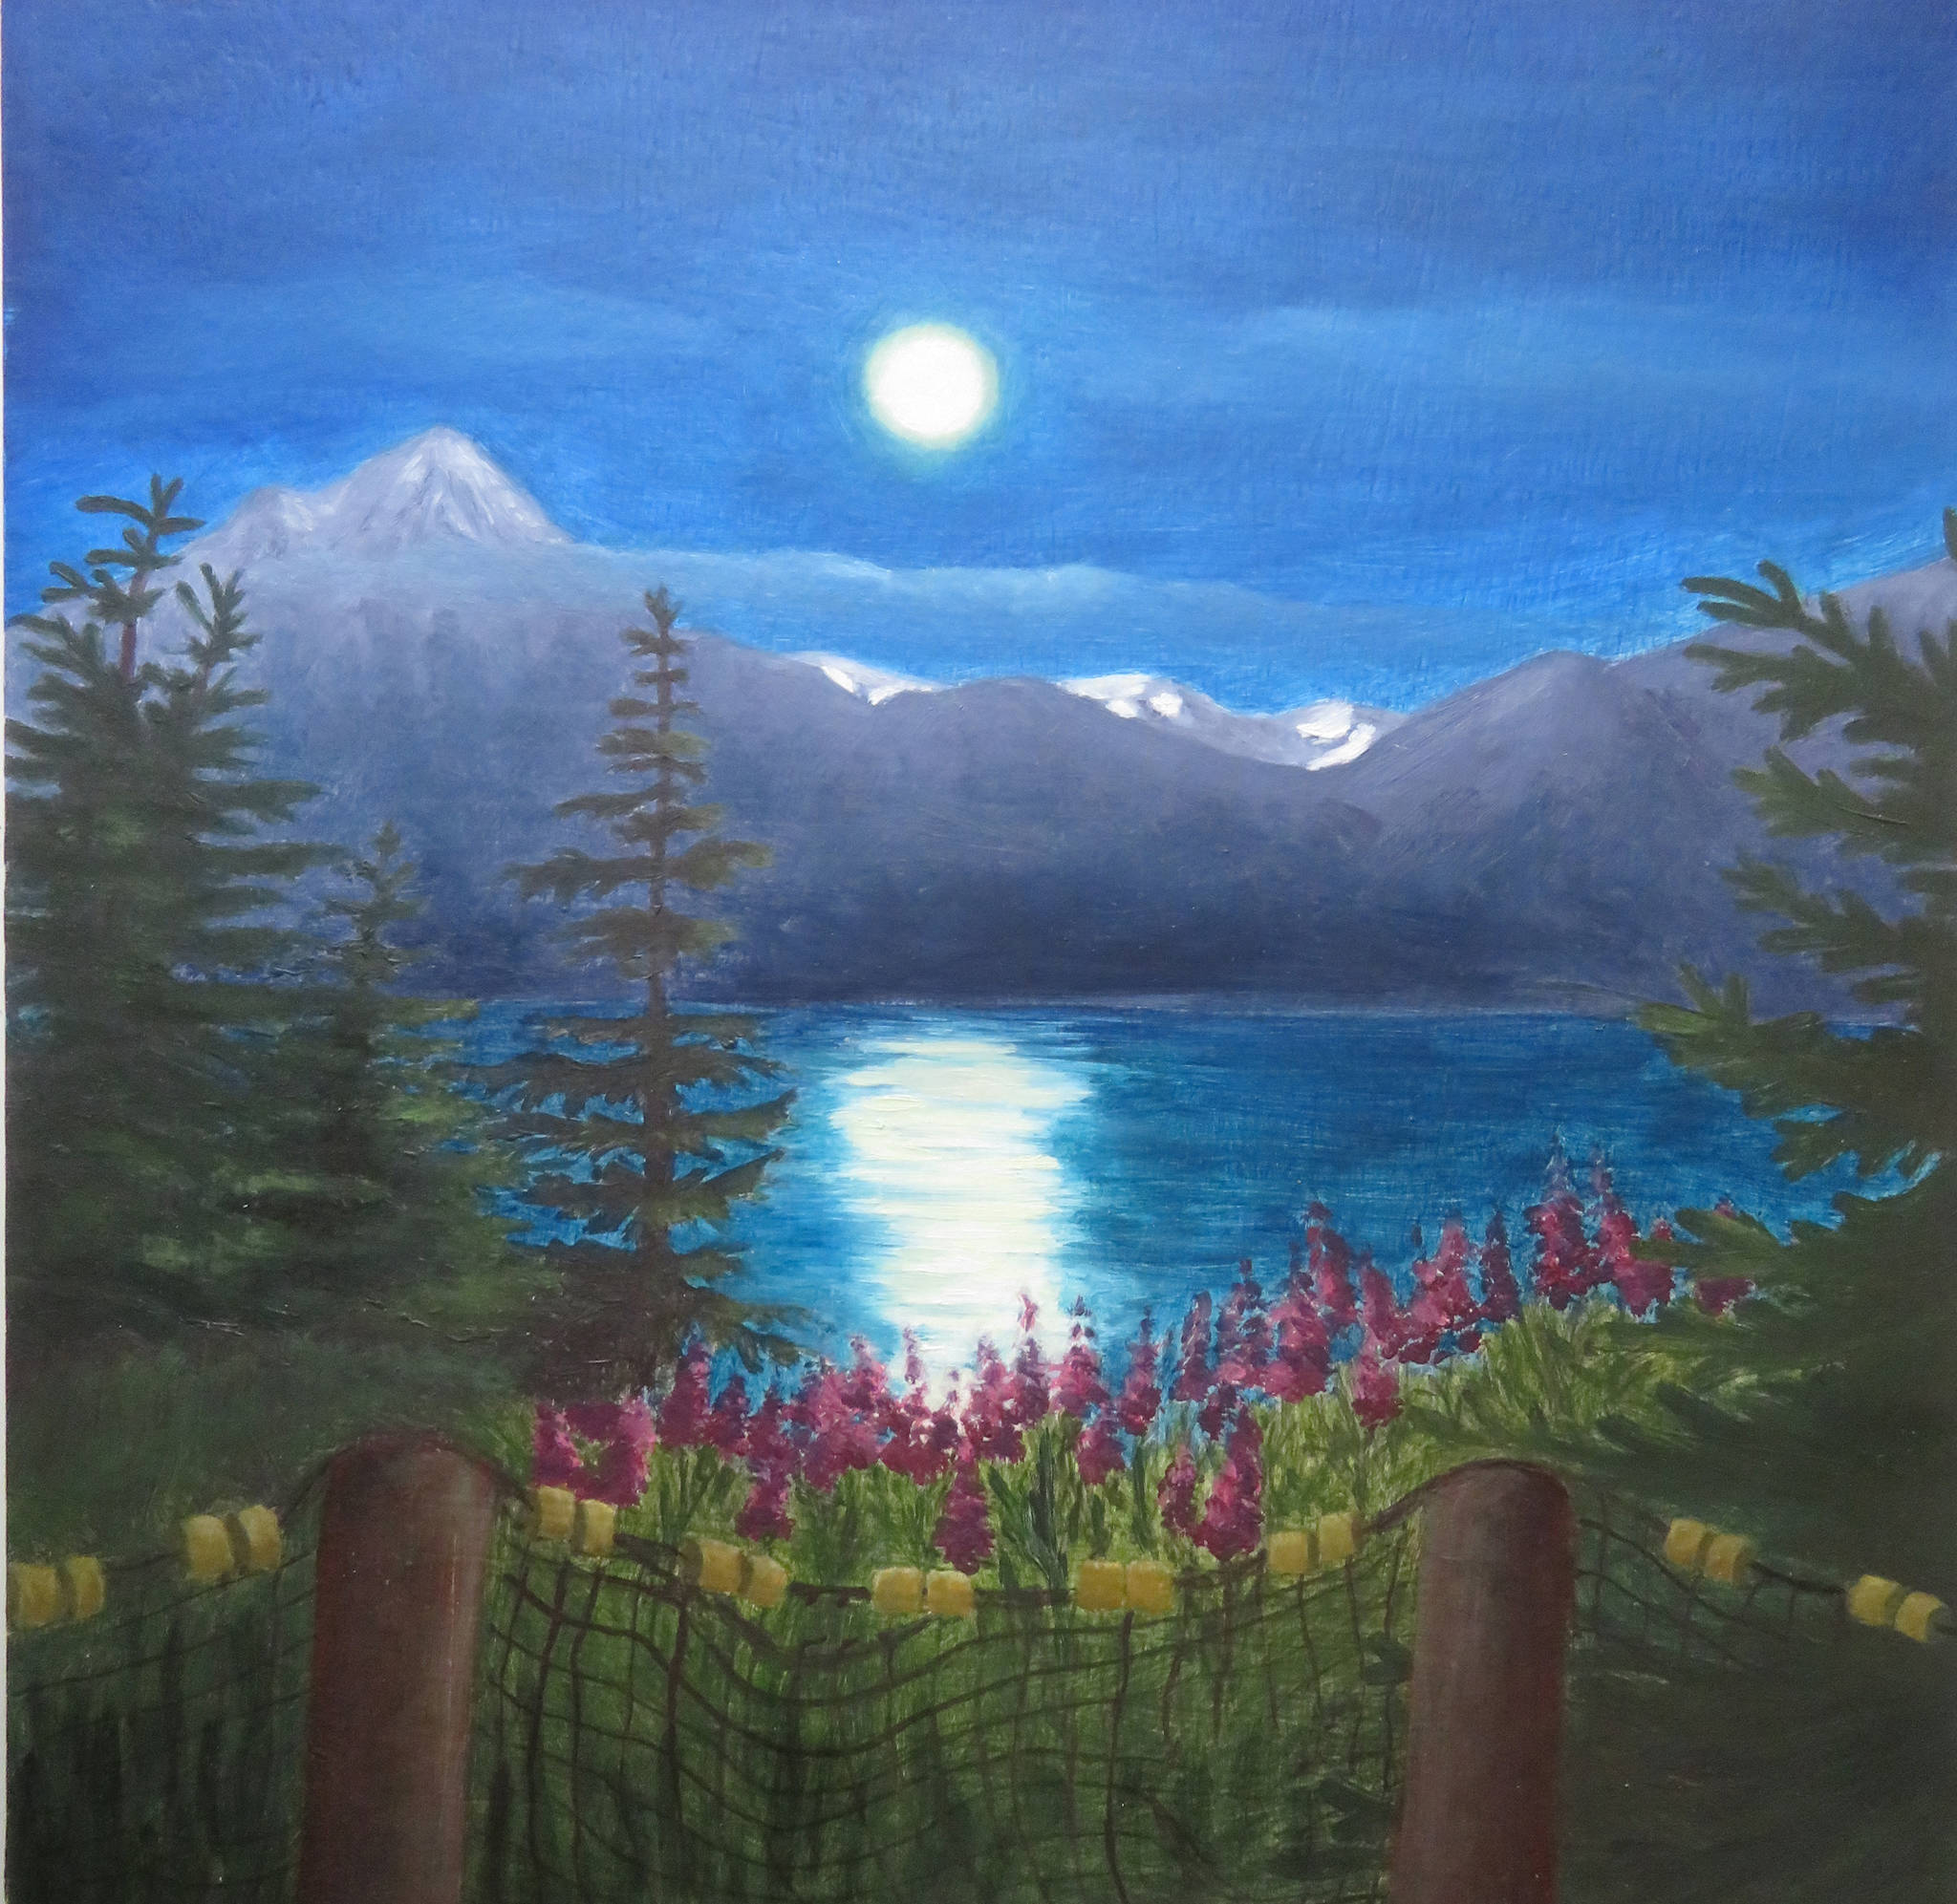 Amanda Kelly’s “Moonlight on the Bay” is one of the works of art shown at the Homer Council on the Arts for its October 2020 show in Homer, Alaska. (Photo courtesy Homer Council on the Arts)                                Amanda Kelly’s “Moonlight on the Bay” is one of the works of art shown at the Homer Council on the Arts for its October 2020 show in Homer, Alaska. (Photo courtesy Homer Council on the Arts)